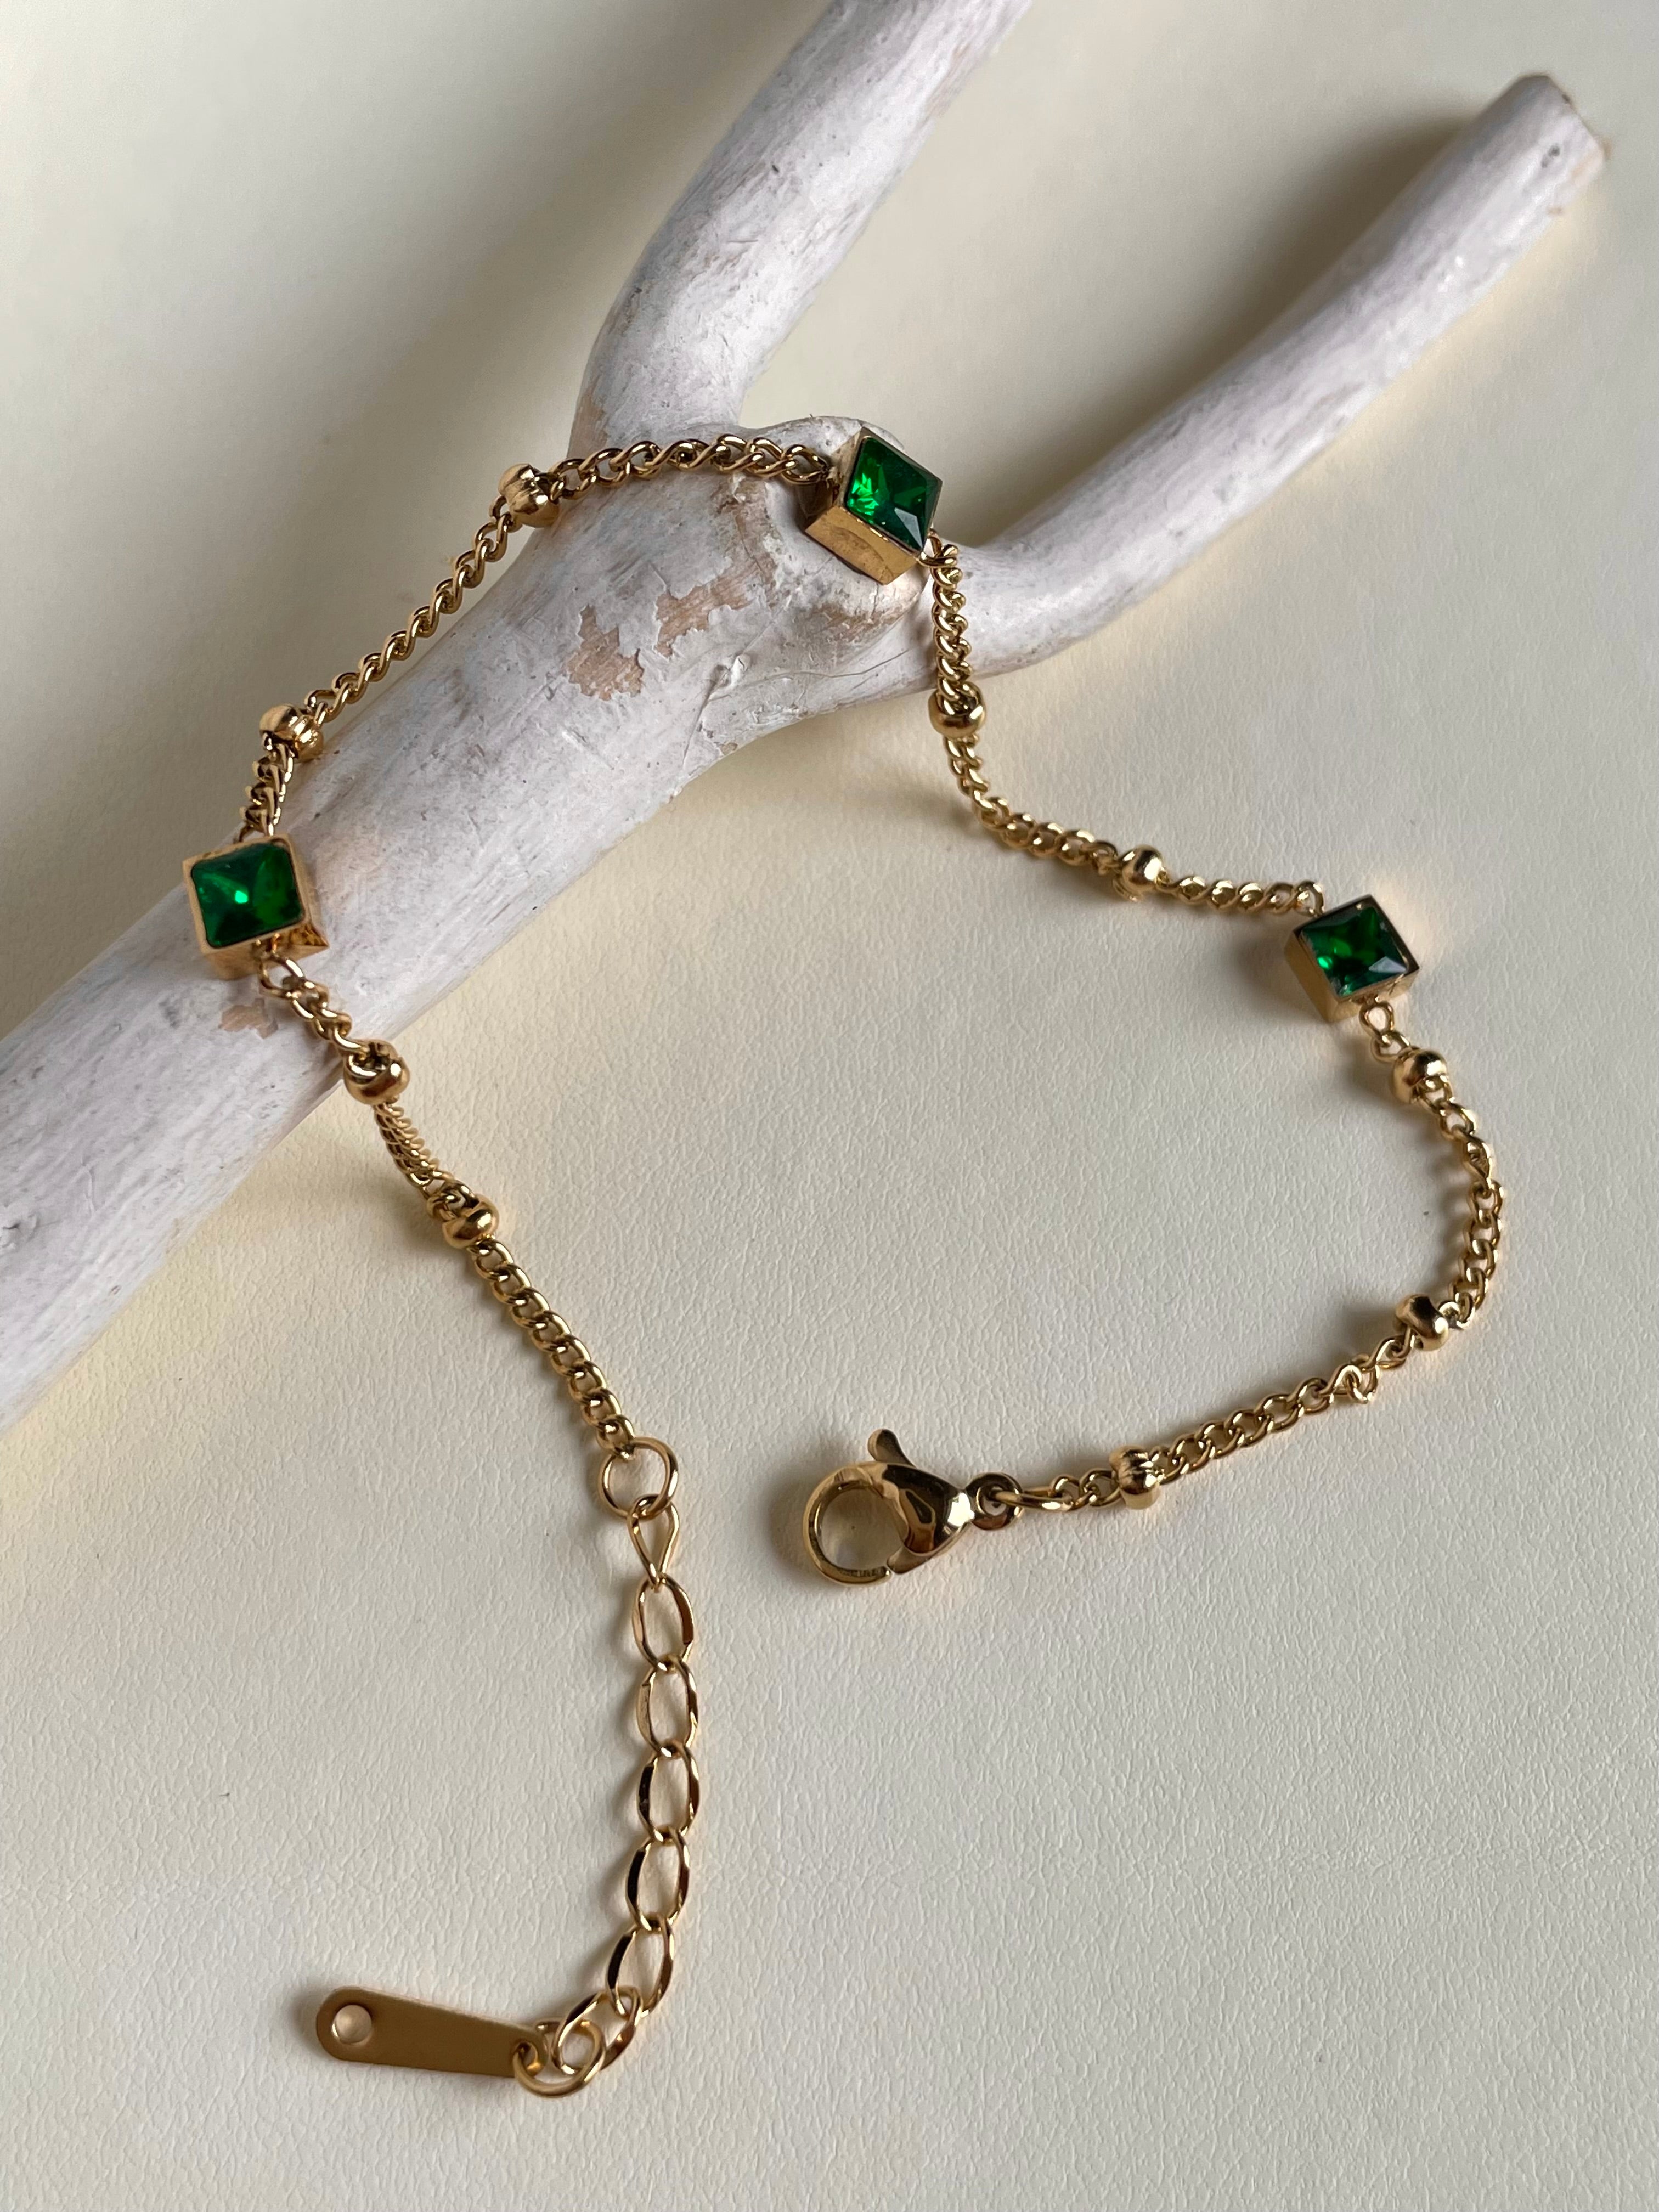 Estate Emerald and Diamond Bracelet | Olympic Jewelry - Open For Walk-ins